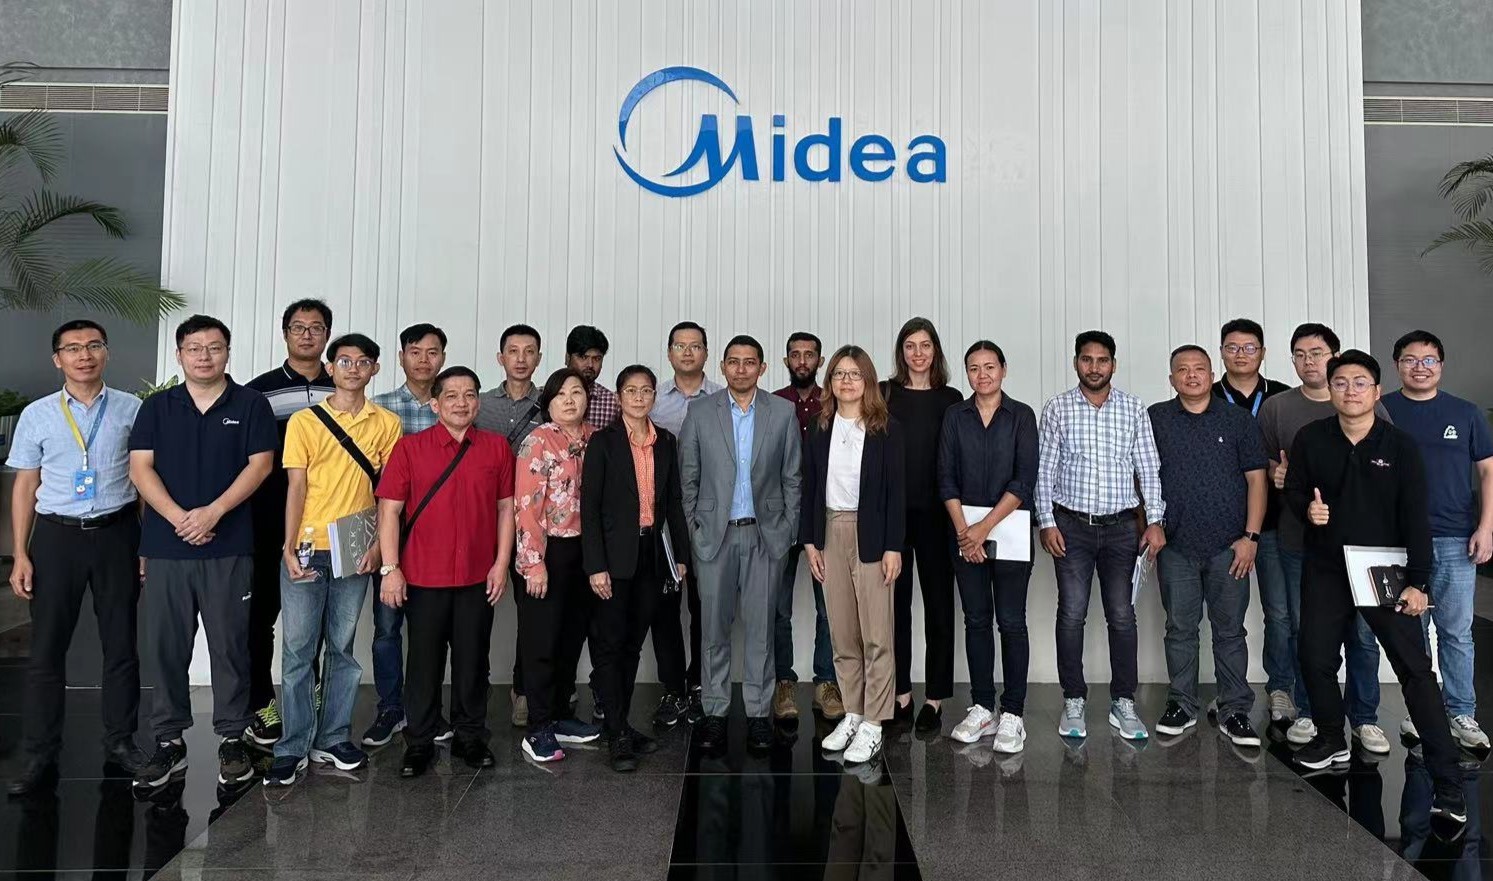 The delegates visited Midea Group in Guangdong, China